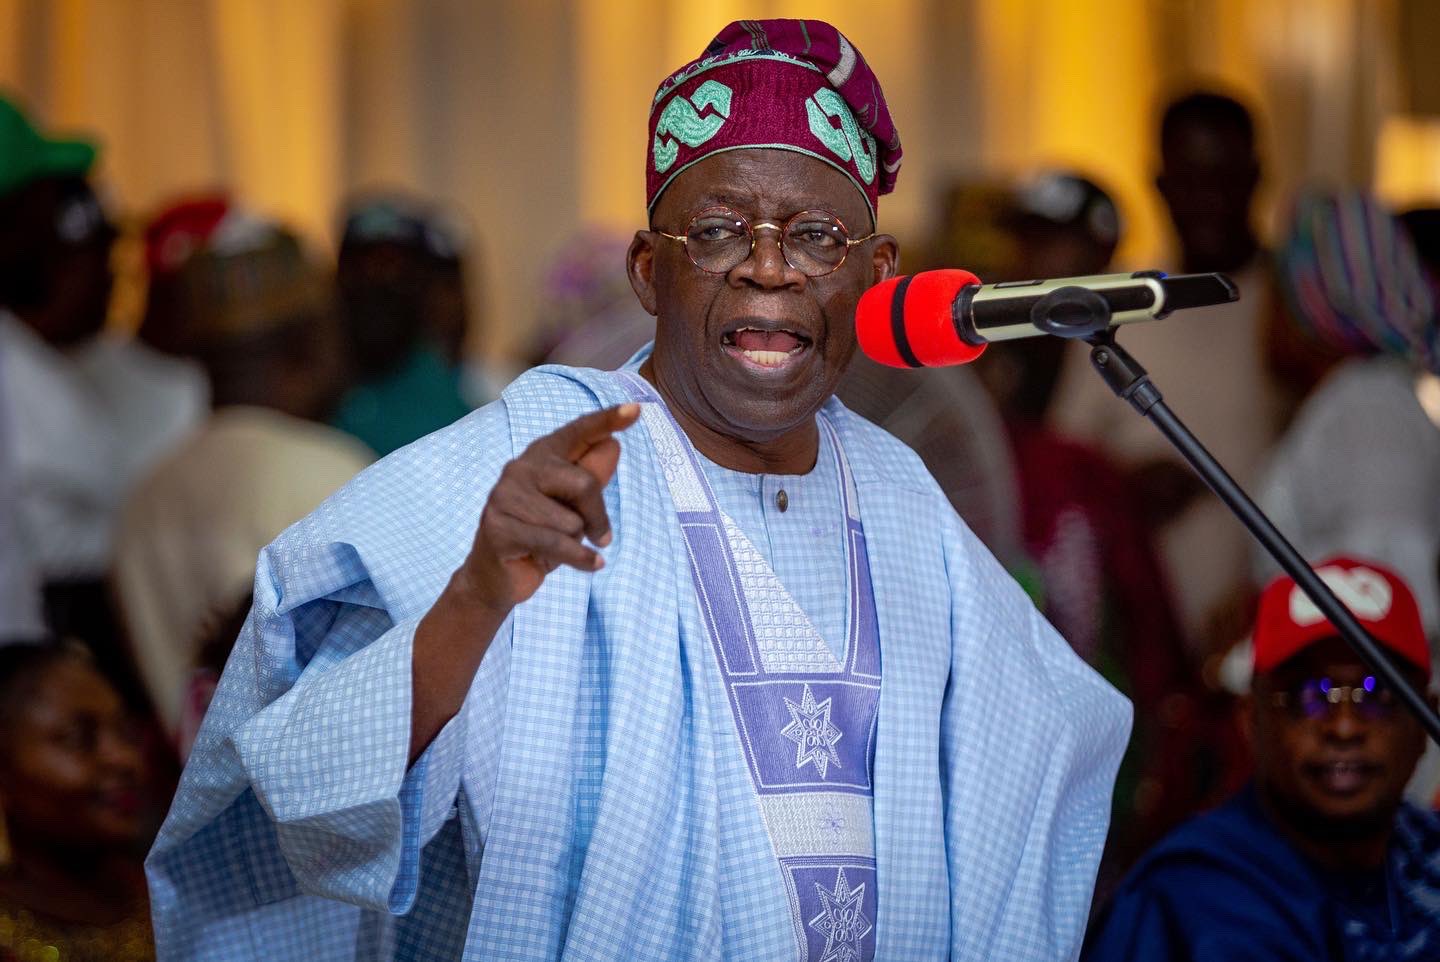 Ahmed Tinubu Will Win By 60% In 2023 - Voice of Nigeria DG